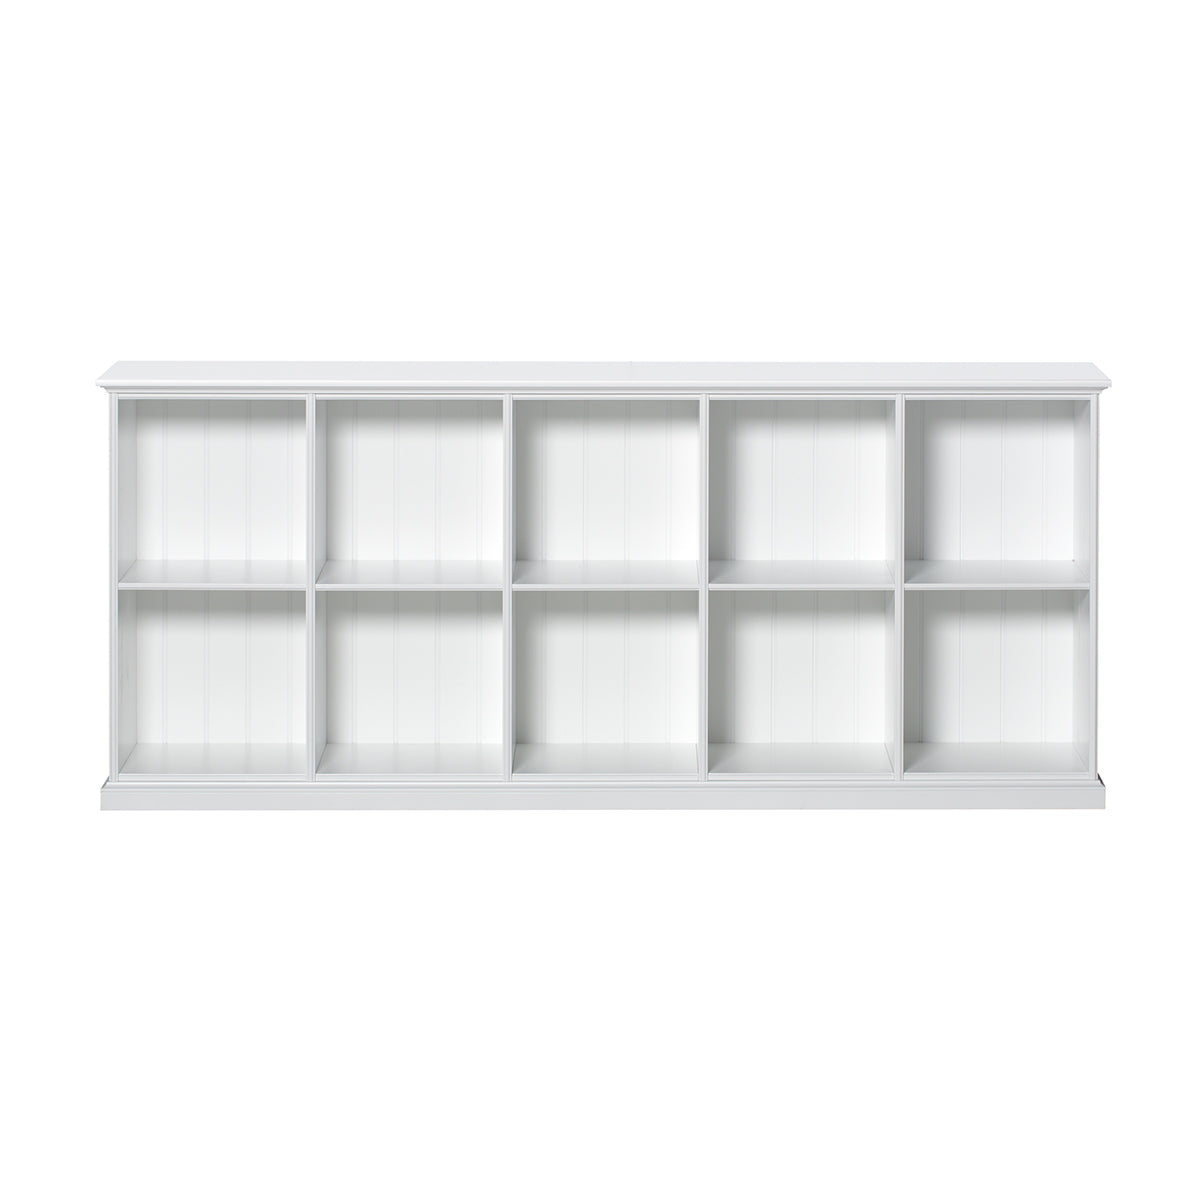 Oliver Furniture Seaside flat shelf with ten compartments, white